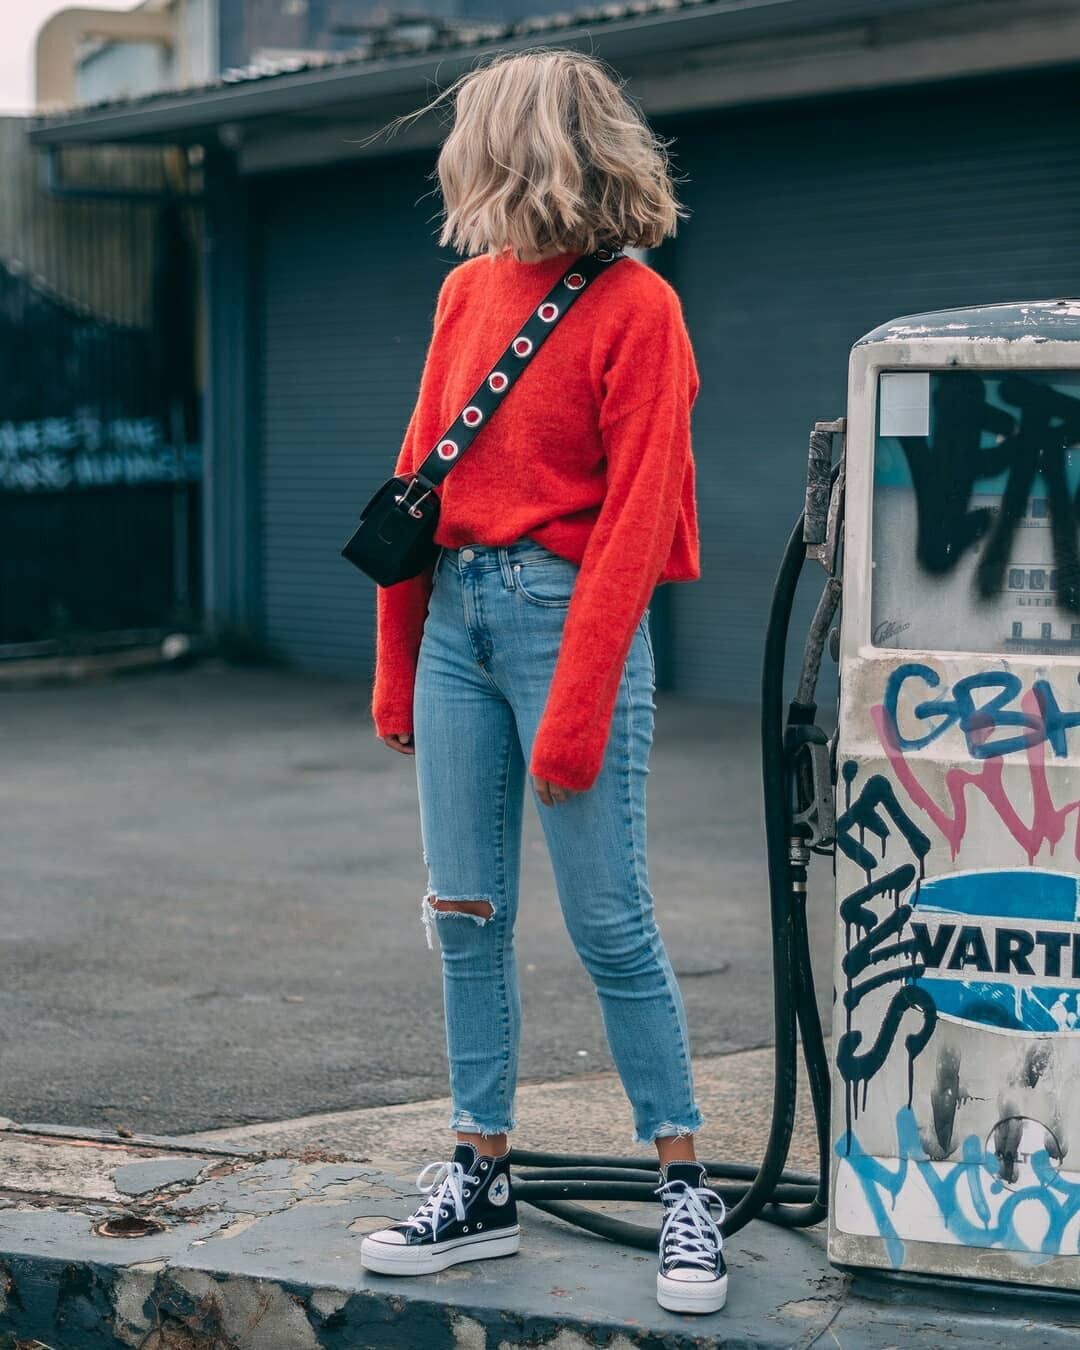 How to Style Skinny Jeans for Every Body
Type